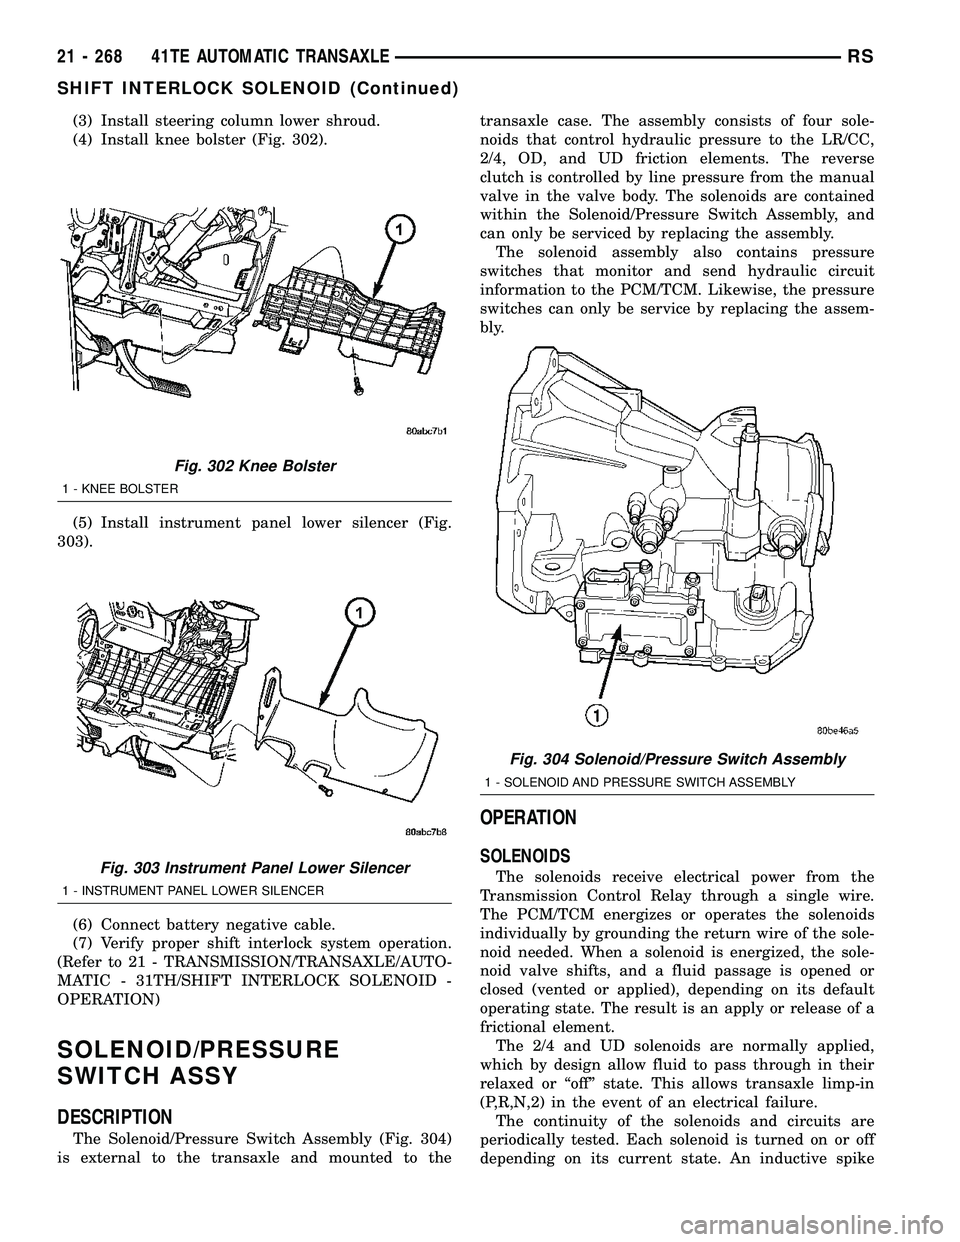 CHRYSLER VOYAGER 2005  Service Manual (3) Install steering column lower shroud.
(4) Install knee bolster (Fig. 302).
(5) Install instrument panel lower silencer (Fig.
303).
(6) Connect battery negative cable.
(7) Verify proper shift inter